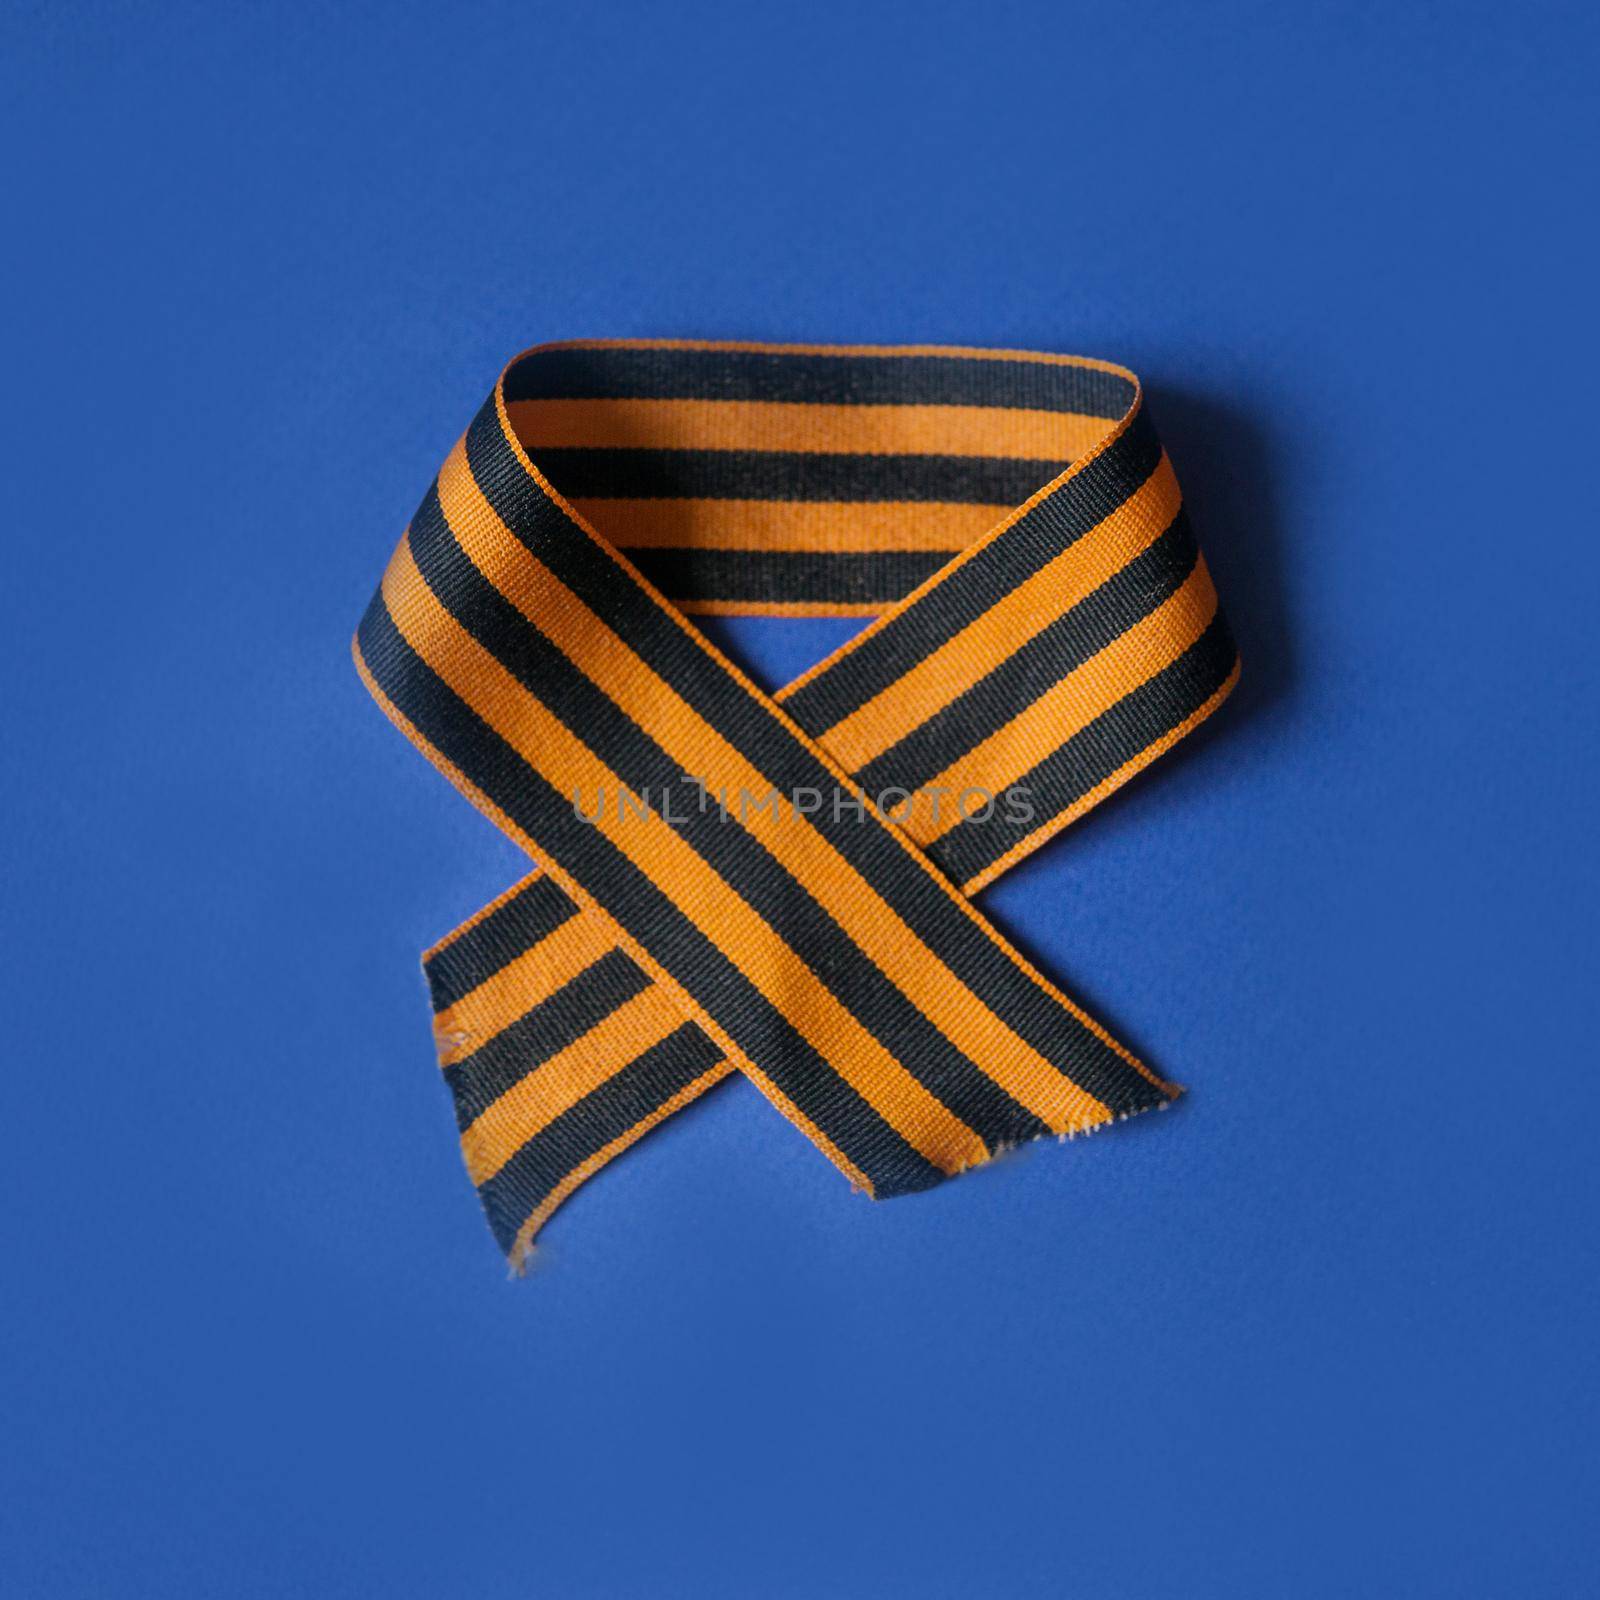 Tver Russia-may 9, 2020: 75 years of Victory in the great Patriotic war. St. George ribbon for 75 years of victory on a blue background. Happy Victory Day